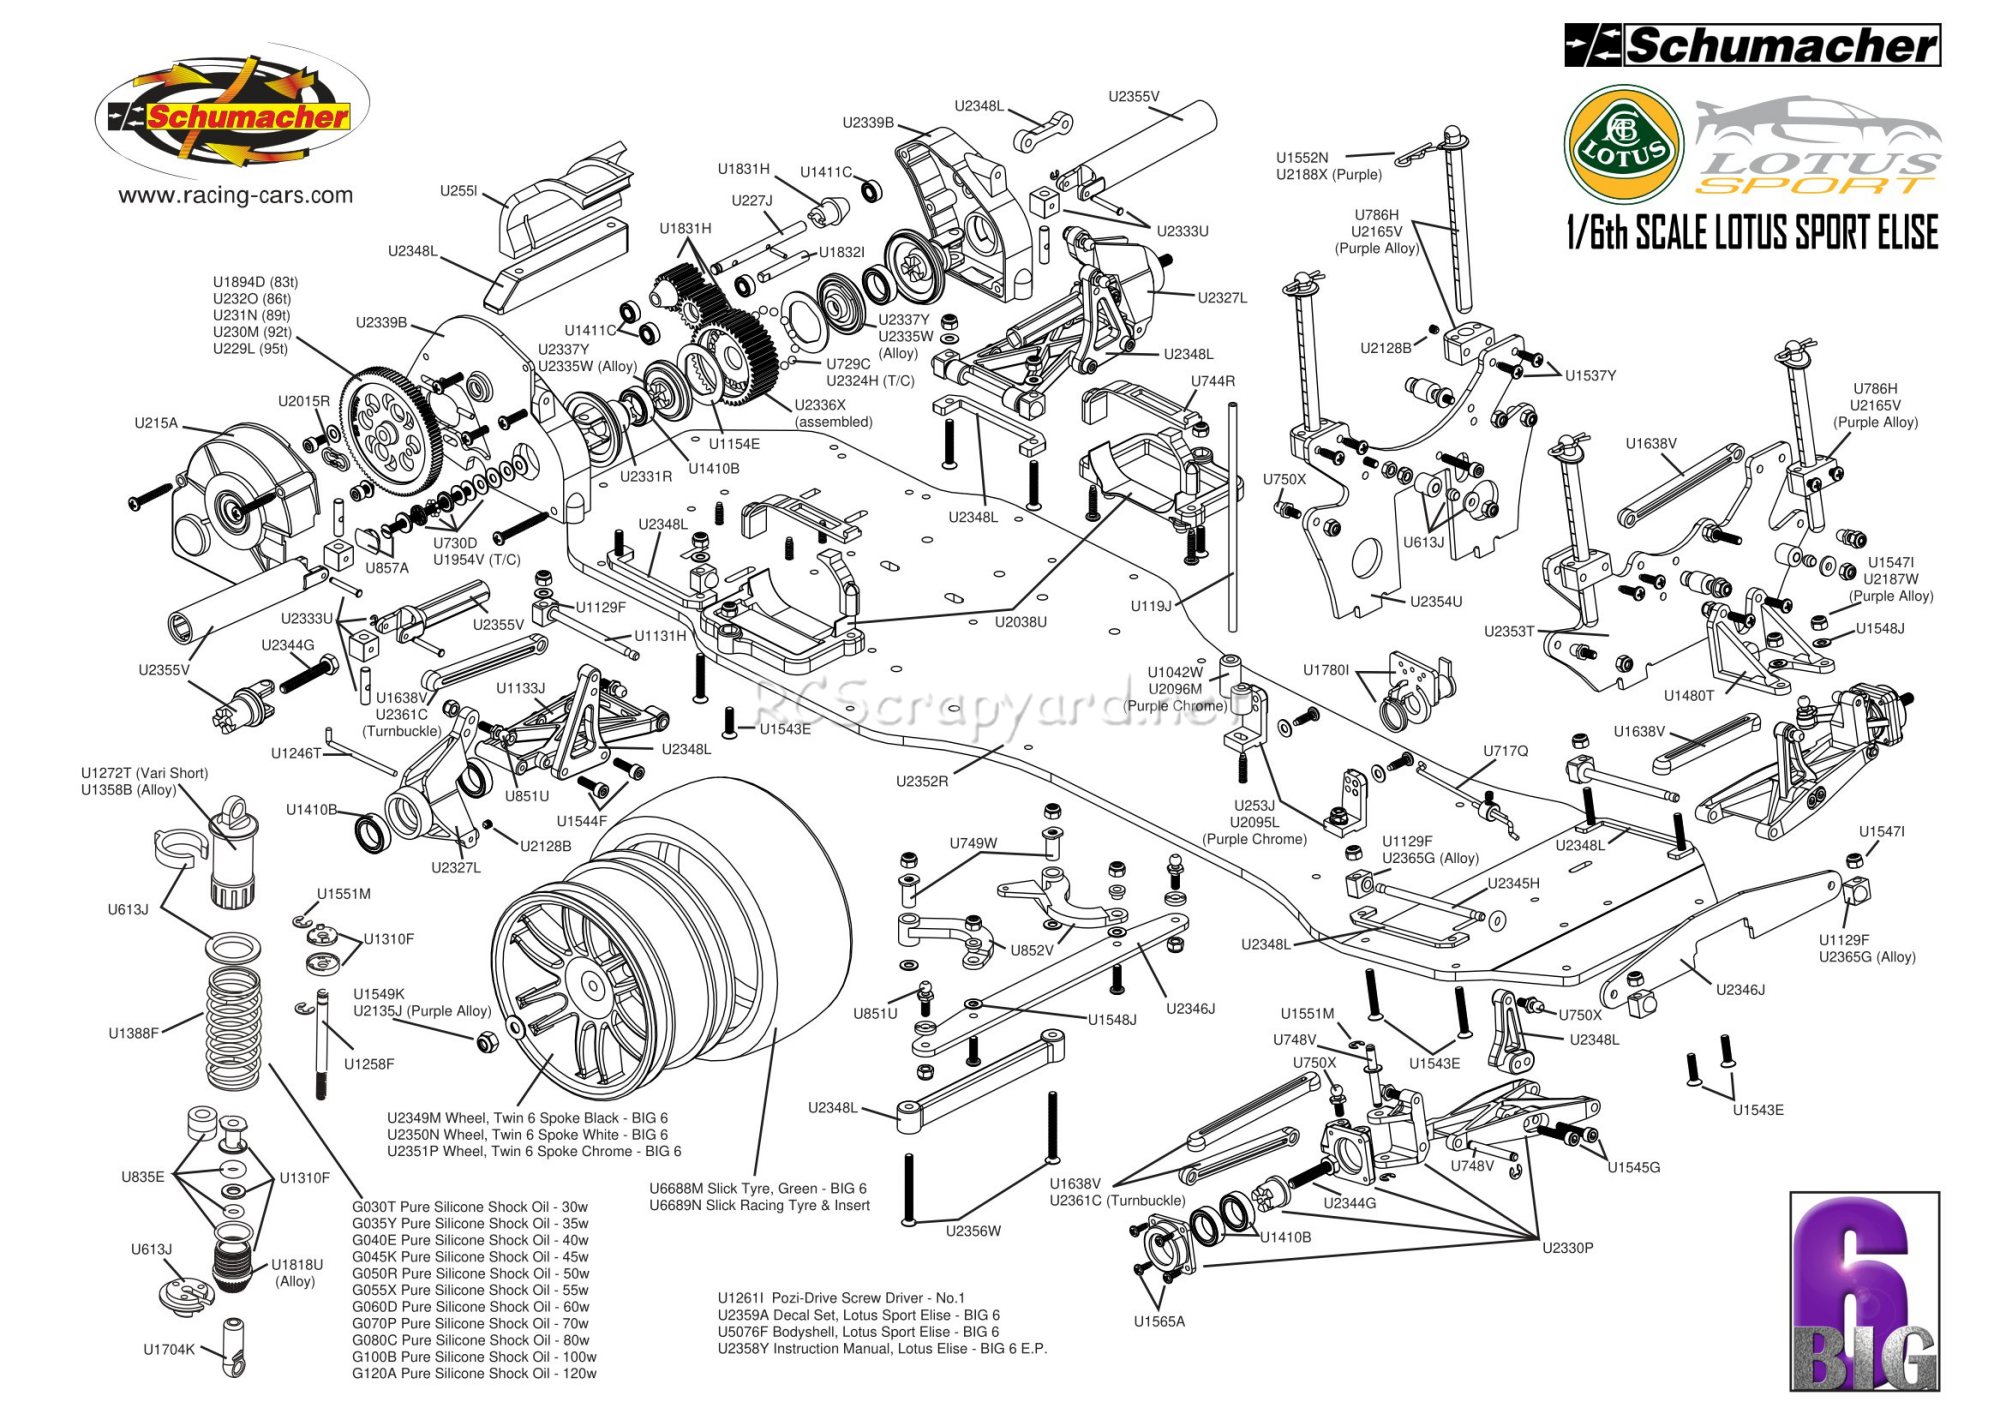 Schumacher - Big 6 Lotus EP - Exploded View - Page 1